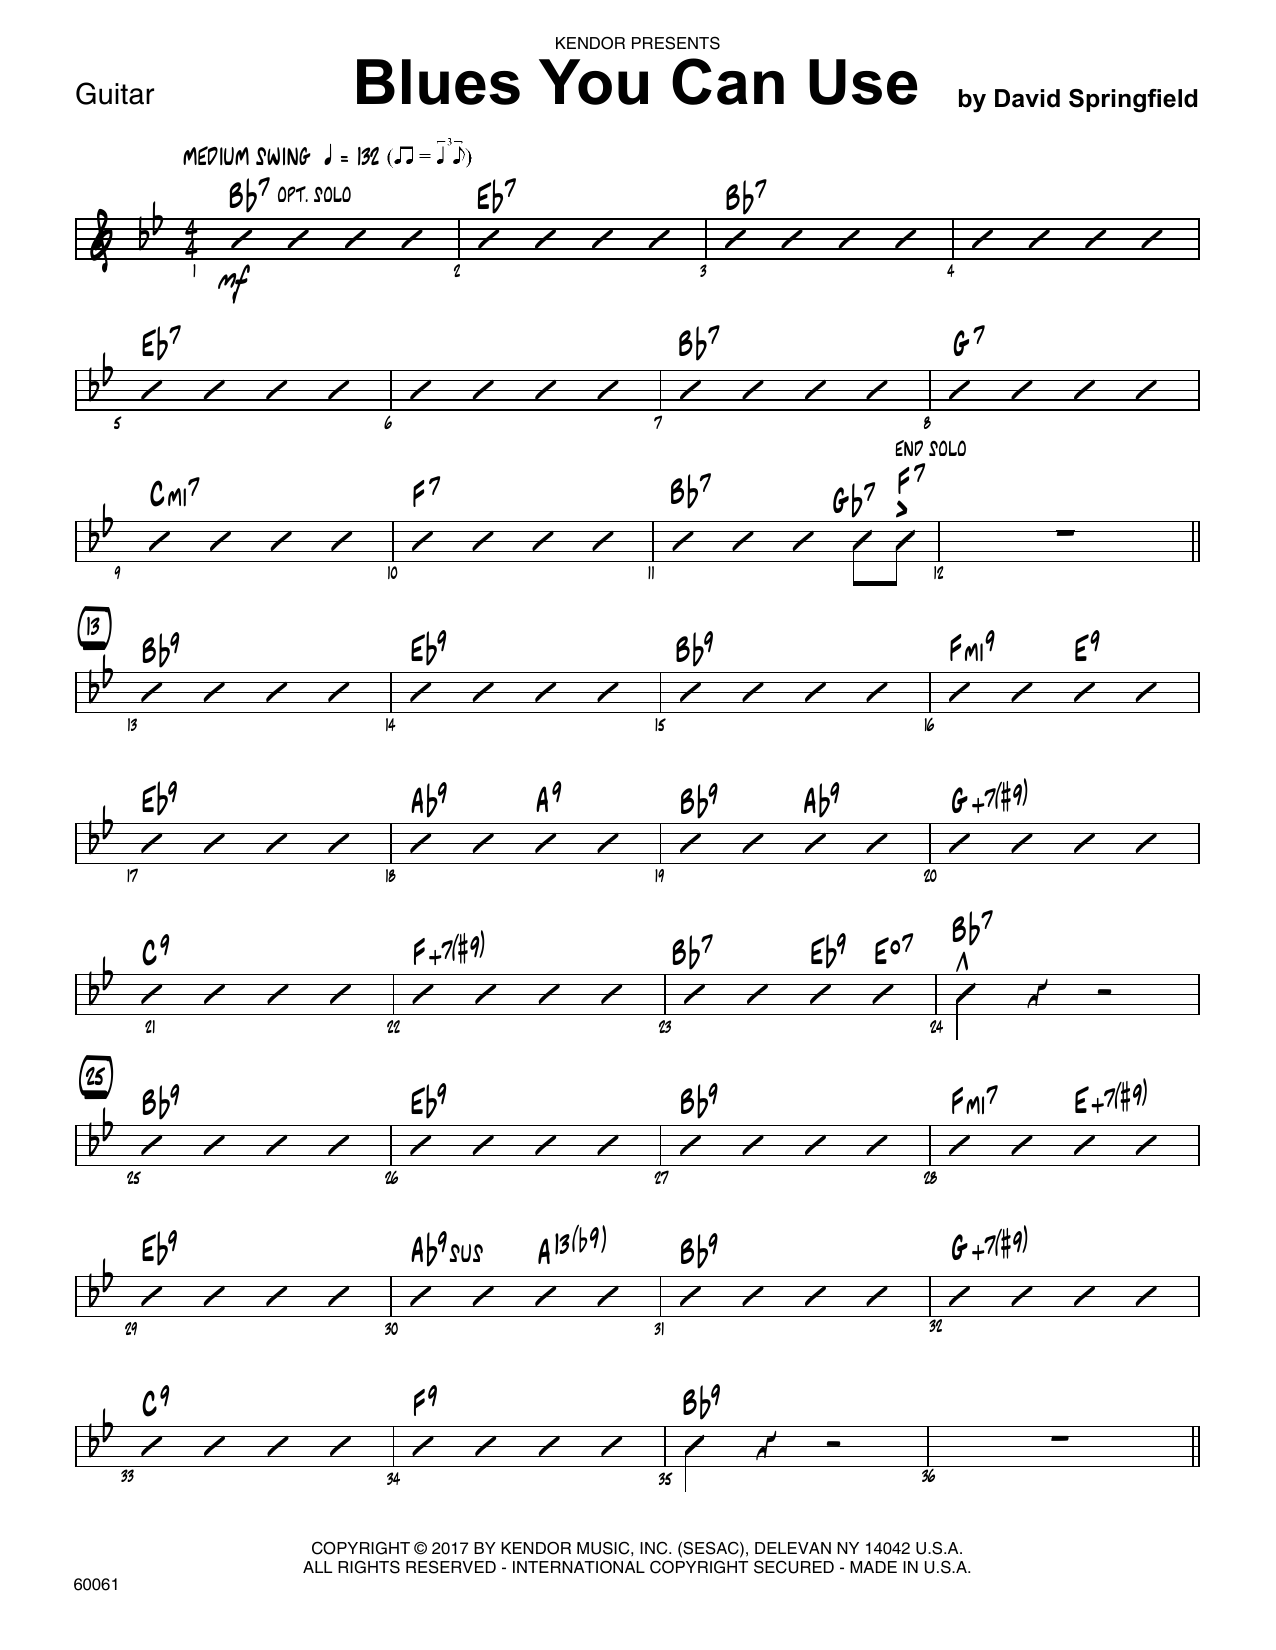 Download David Springfield Blues You Can Use - Guitar sheet music and printable PDF score & Jazz music notes